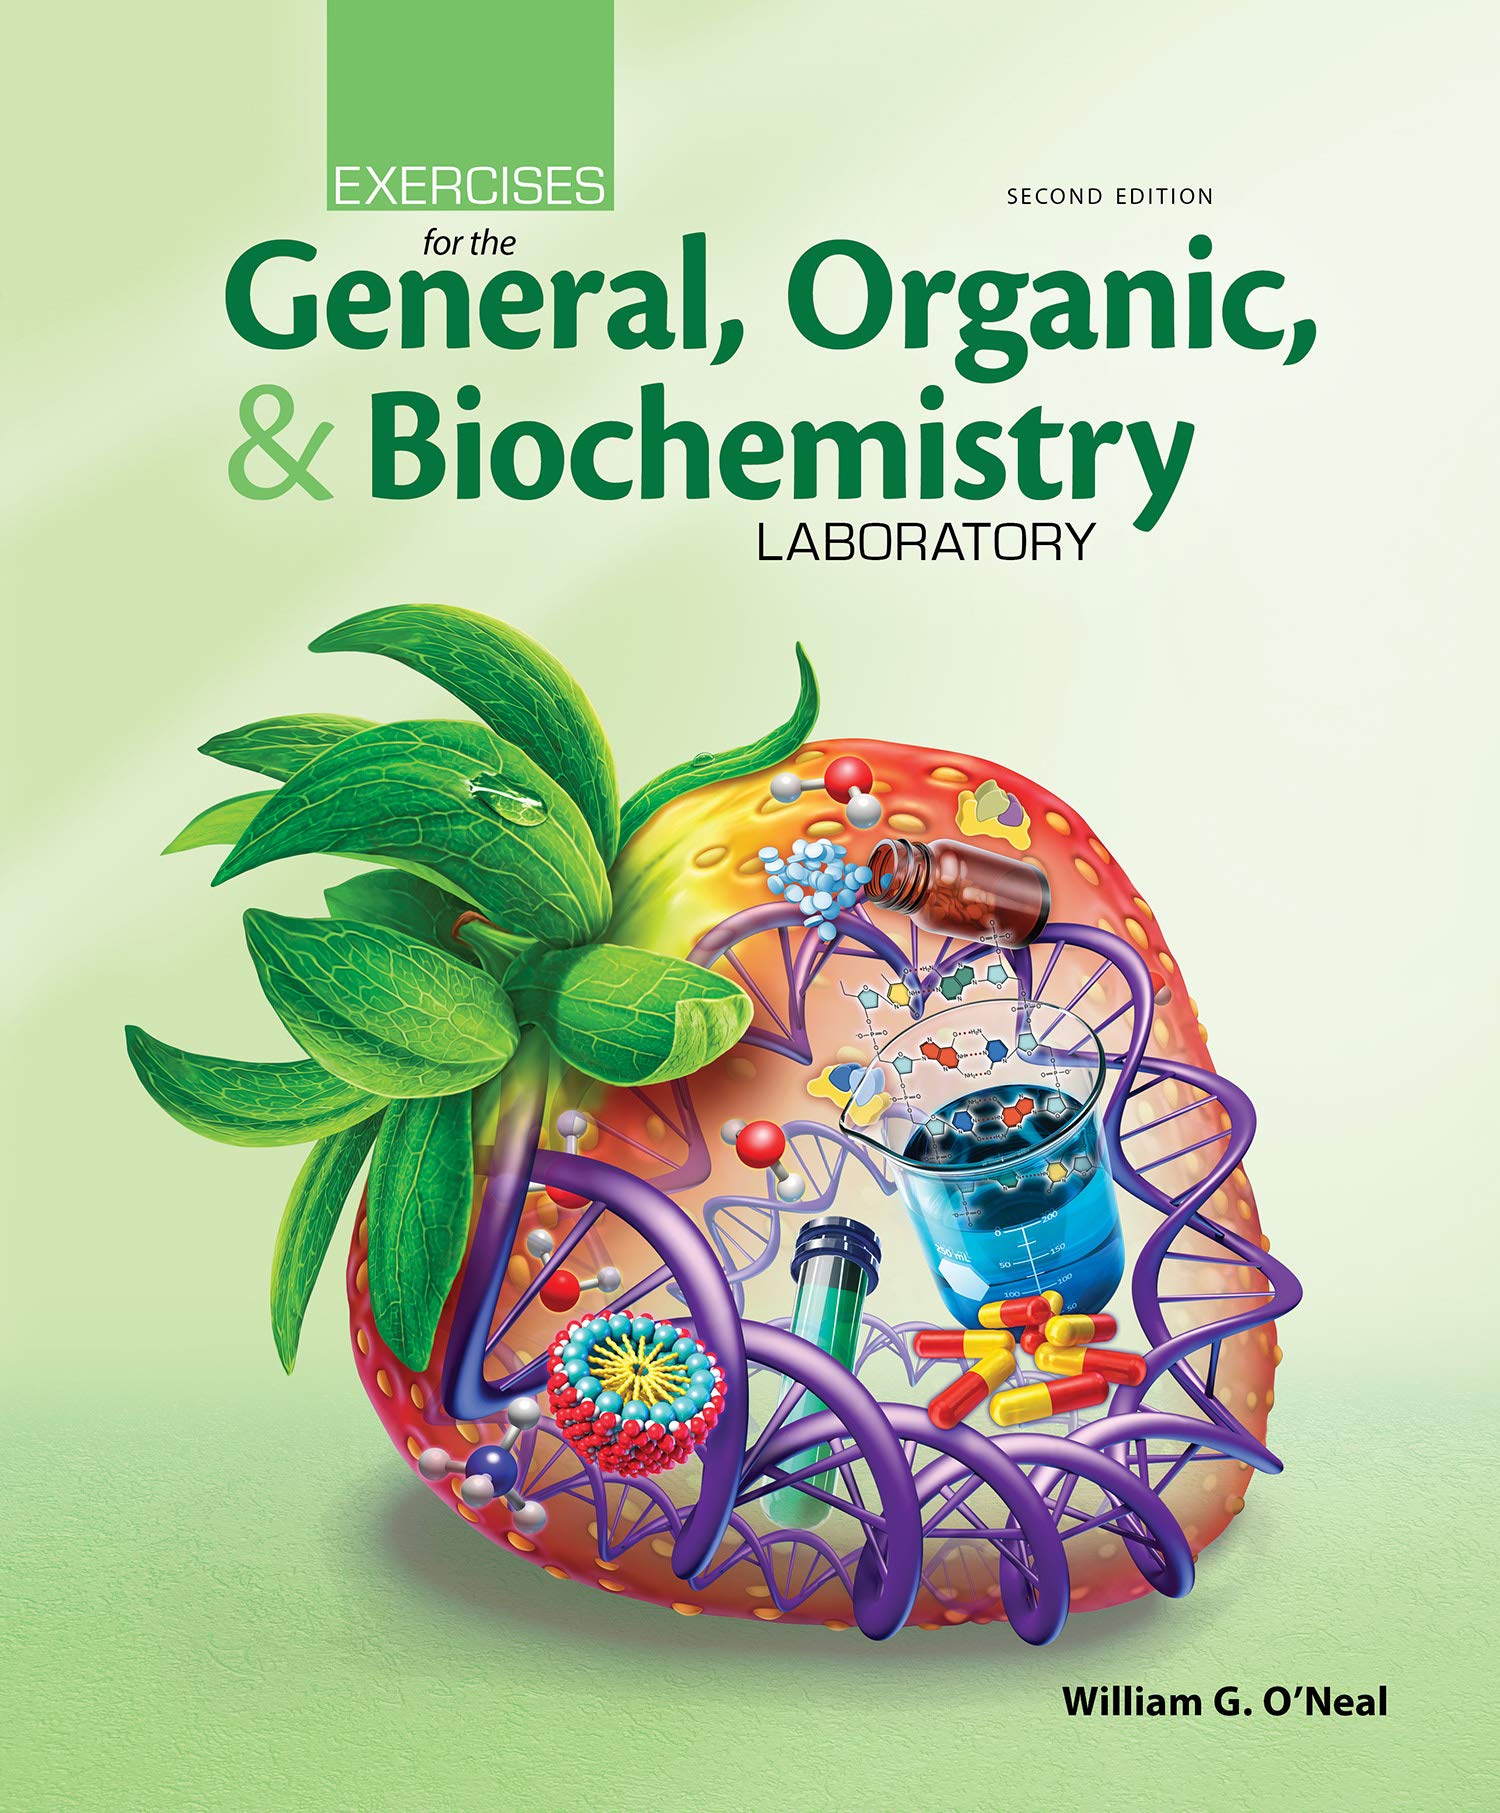 Exercises for the General, Organic, ＆amp; Biochemistry Laboratory, 2nd Edition  by William G. O＆＃39;Neal